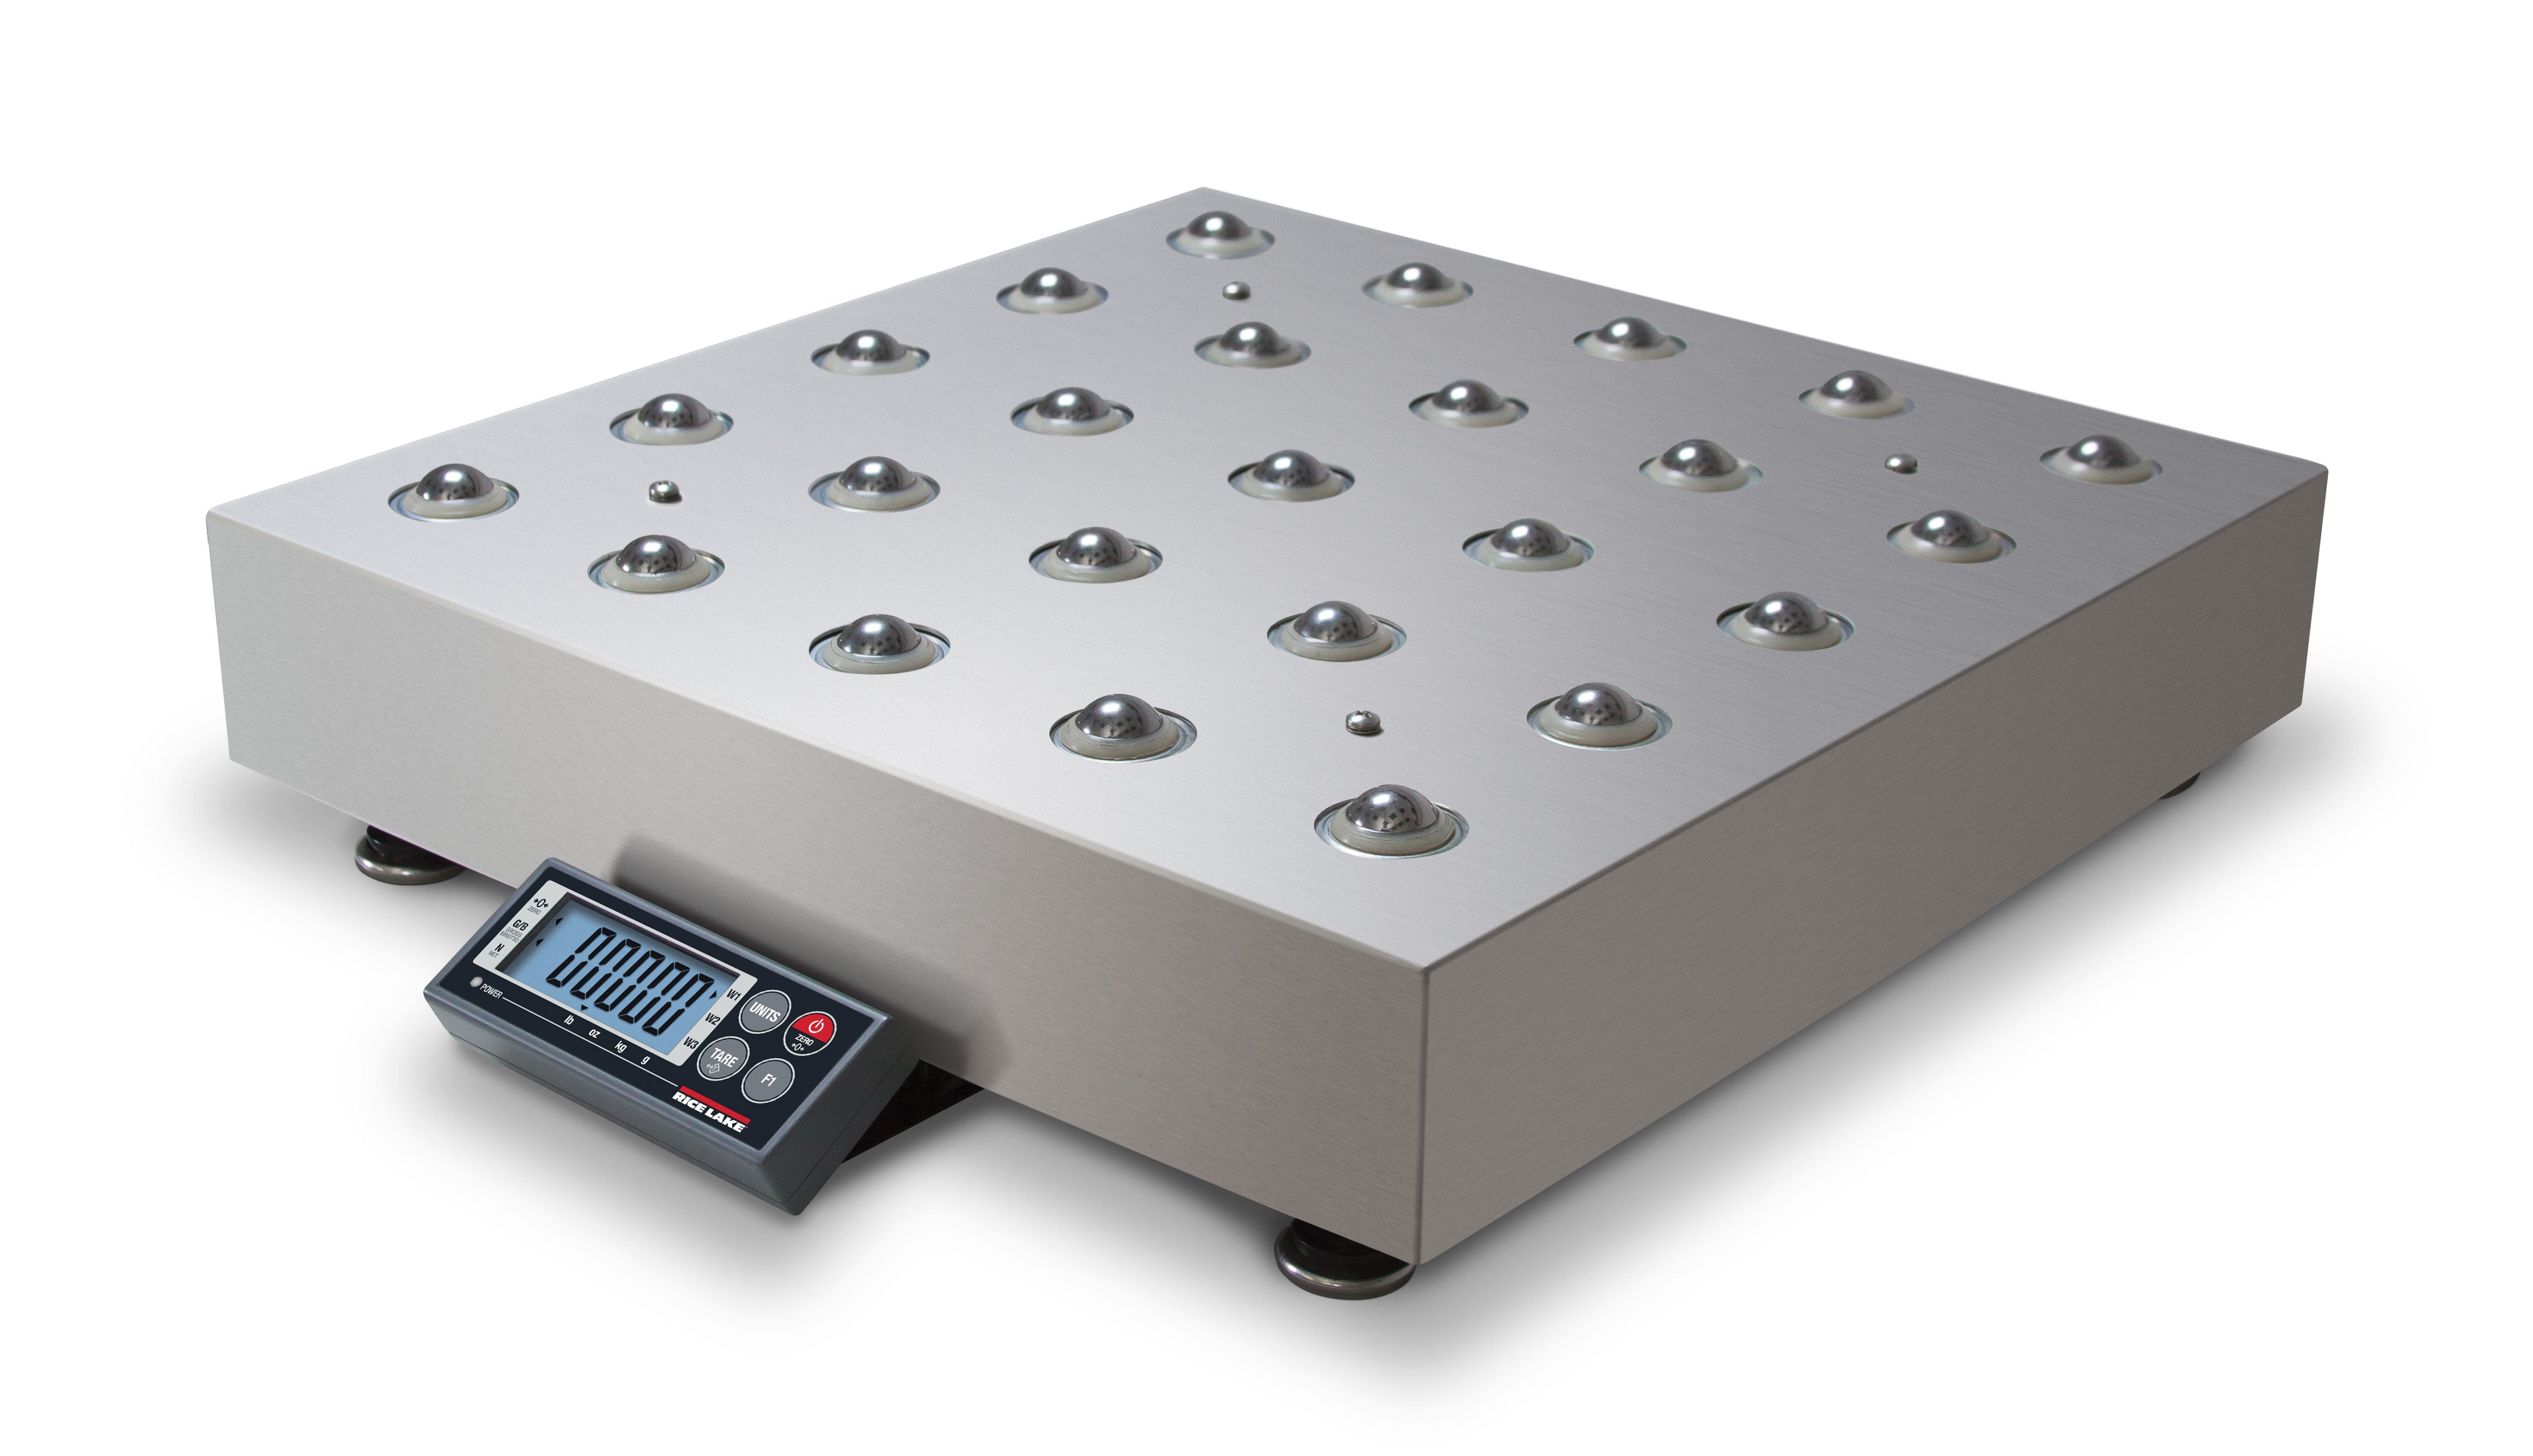 Rice Lake 182384 300 x 0.1 lb/150 x 0.05kg, BP 1818-150S Shipping Digital Scale, Ball Top with 2 years Warranty